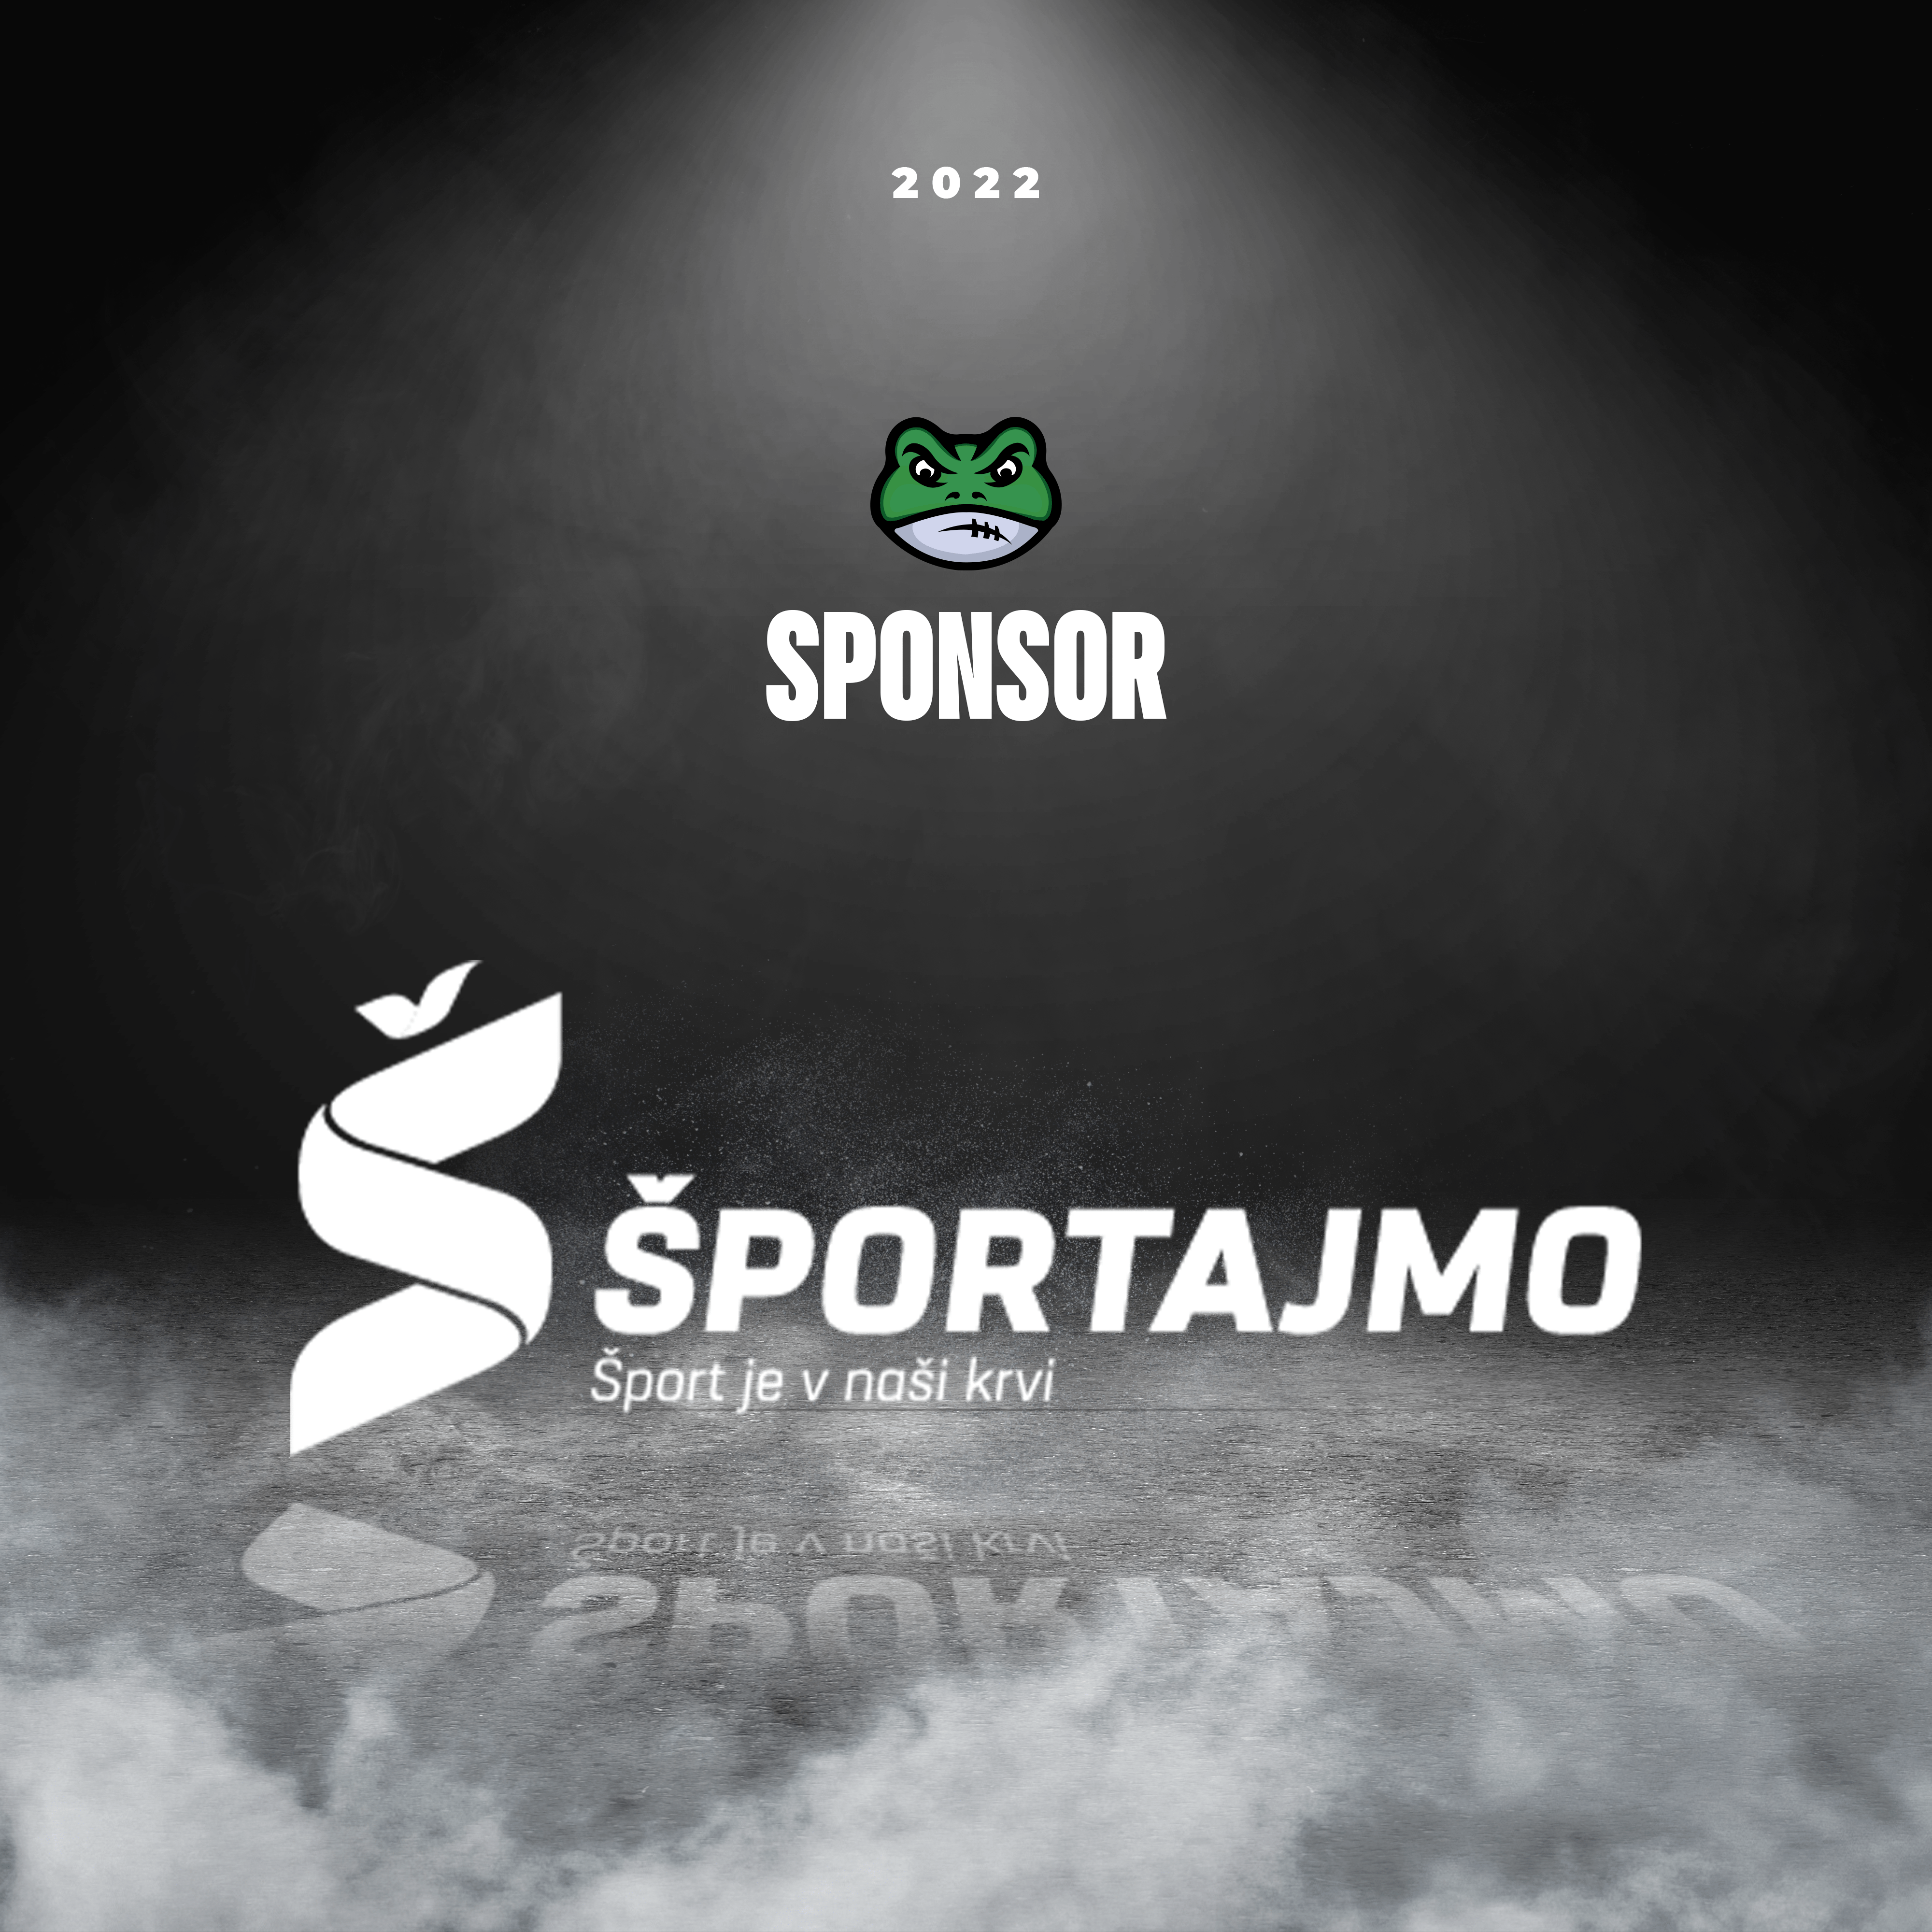 Sportajmo.si will be the importer of sports equipment Ljubljana Frogs in 2022 as well